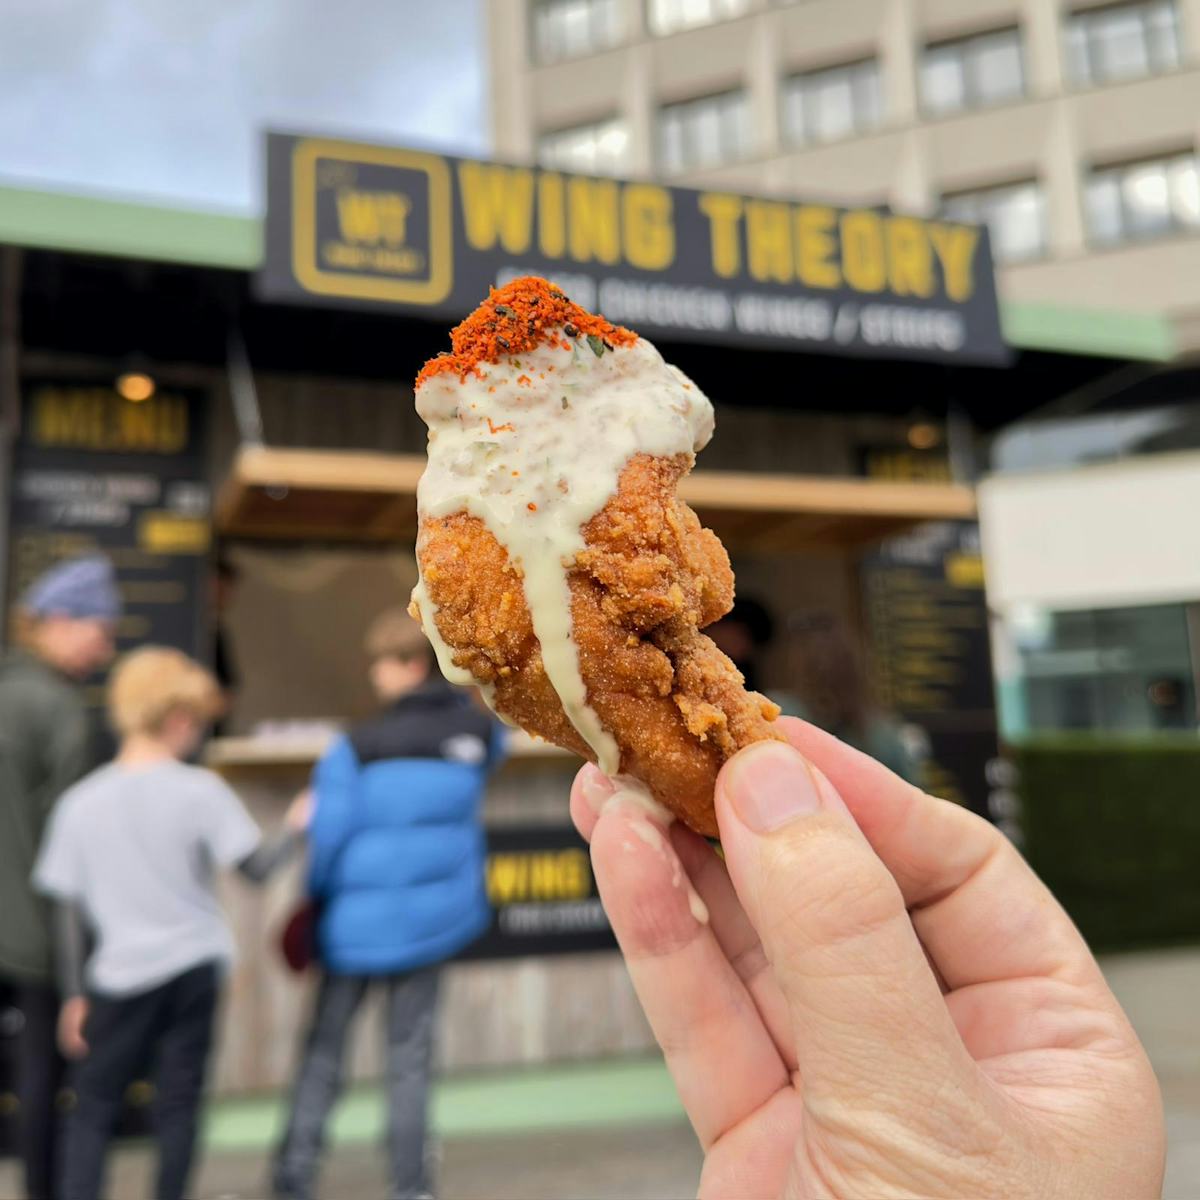 Wing Theory